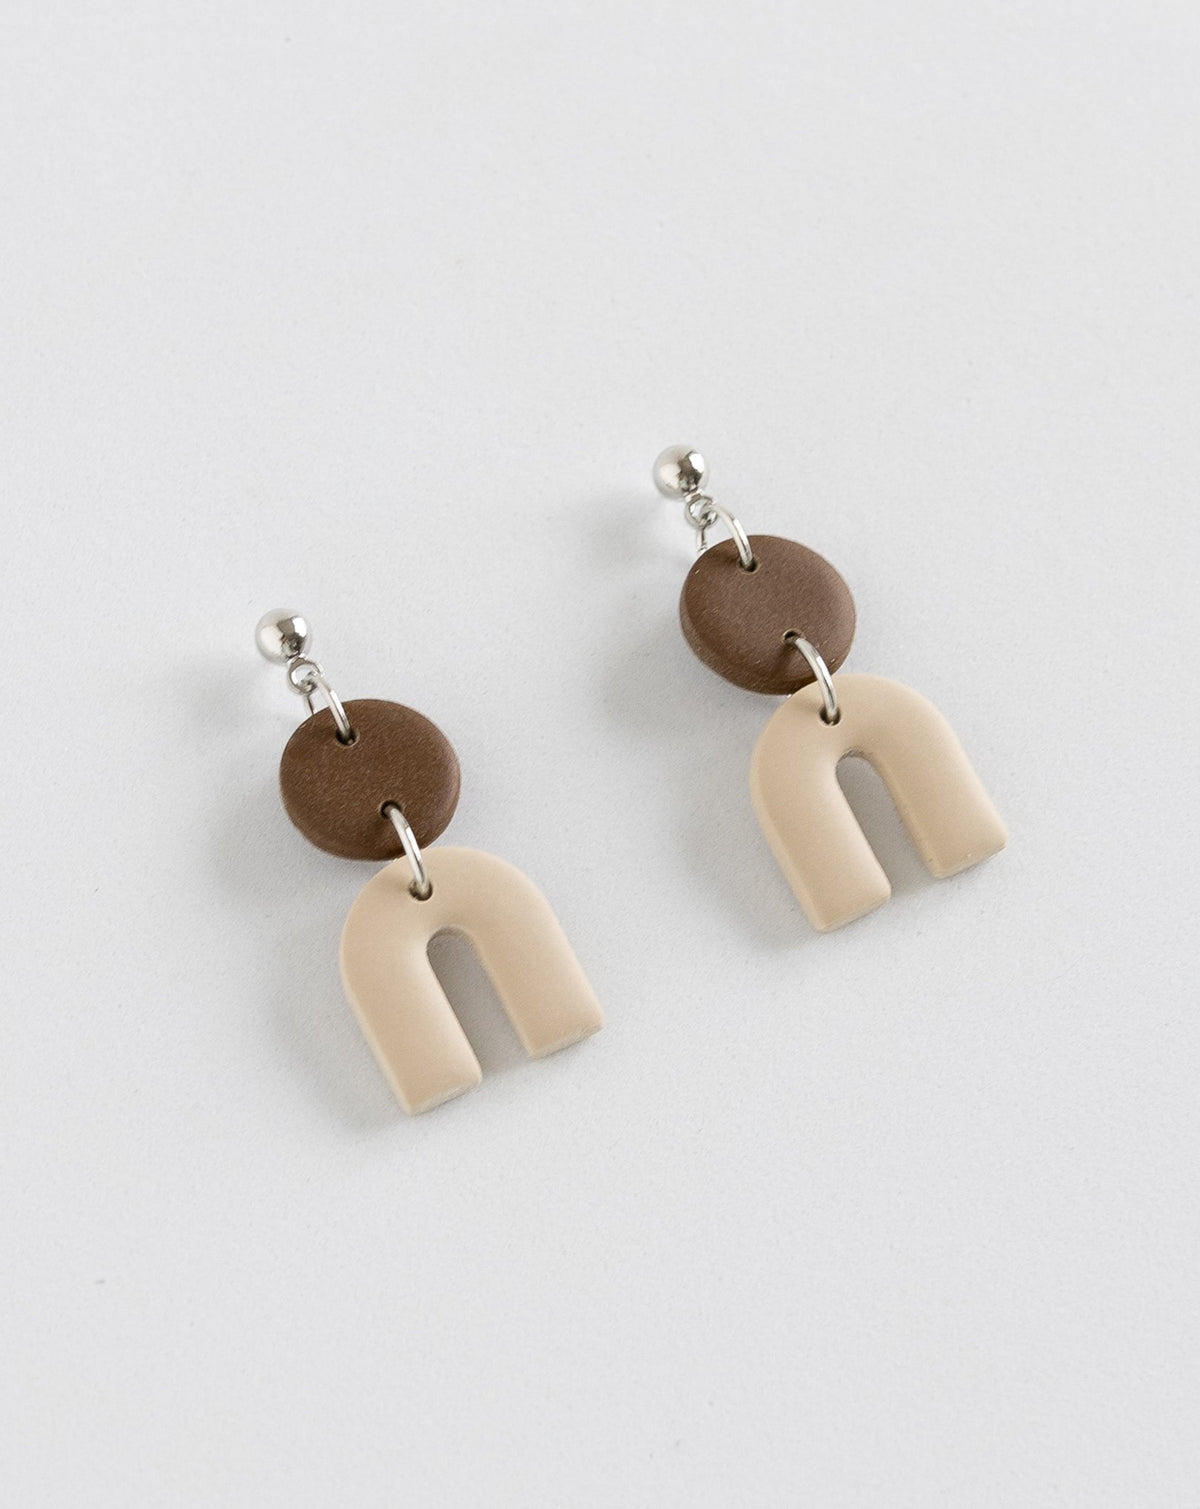 Tiny Arch earrings in two part of brown and beige clay parts with silver Ball studs, angled view.